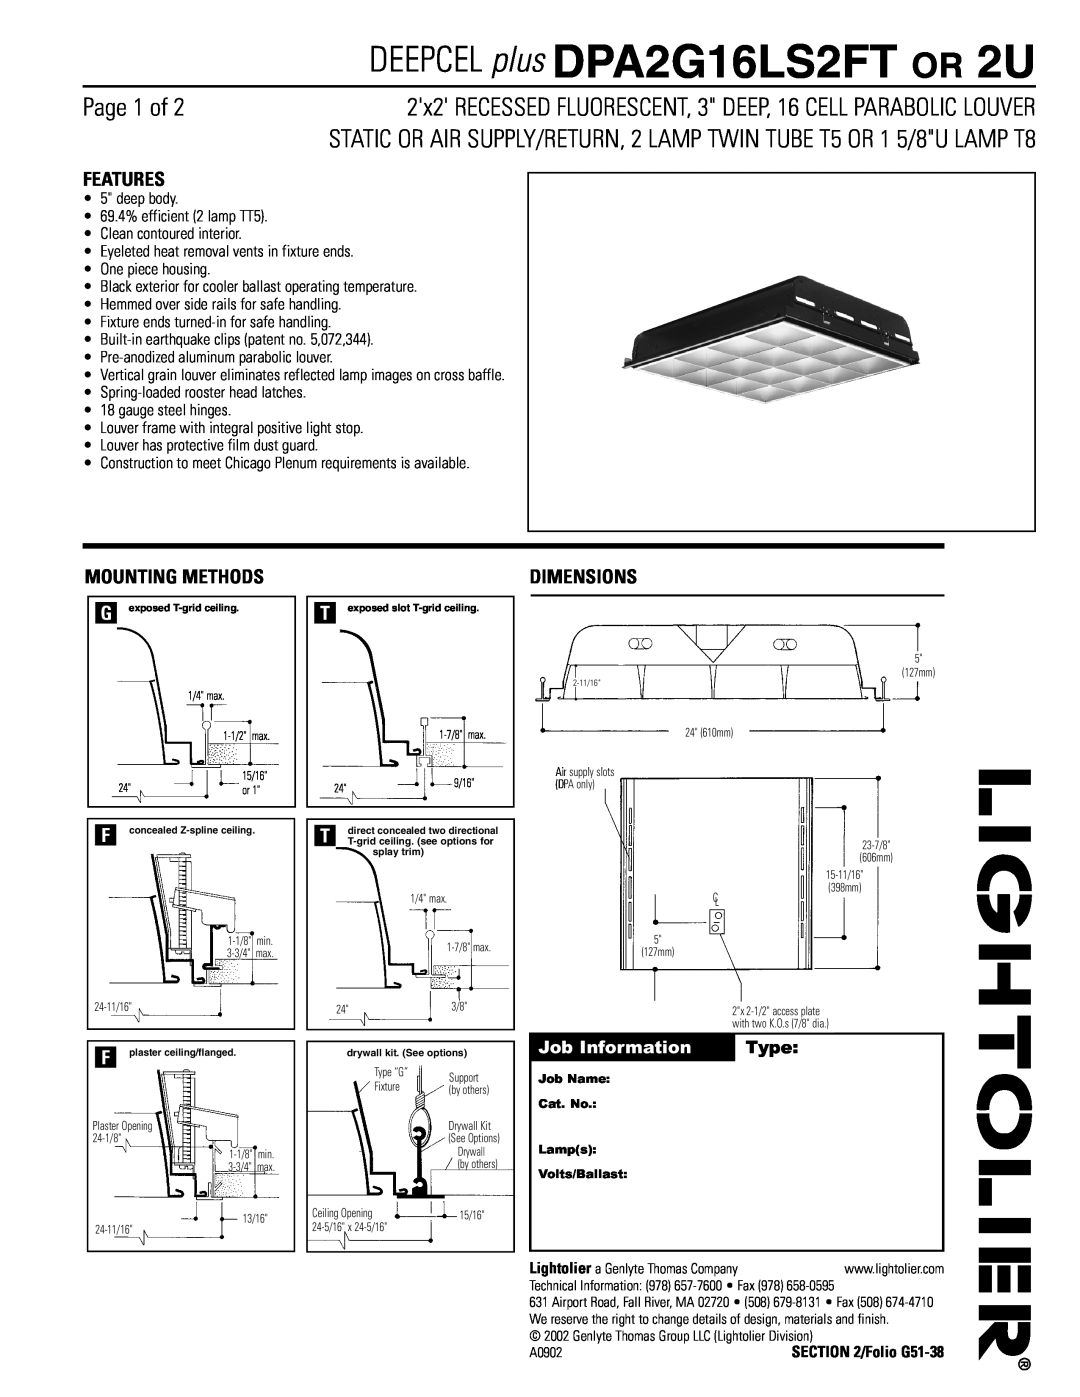 Lightolier DPA2G16LS2FT or 2U dimensions Page 1 of, Features, Mounting Methods, Dimensions 